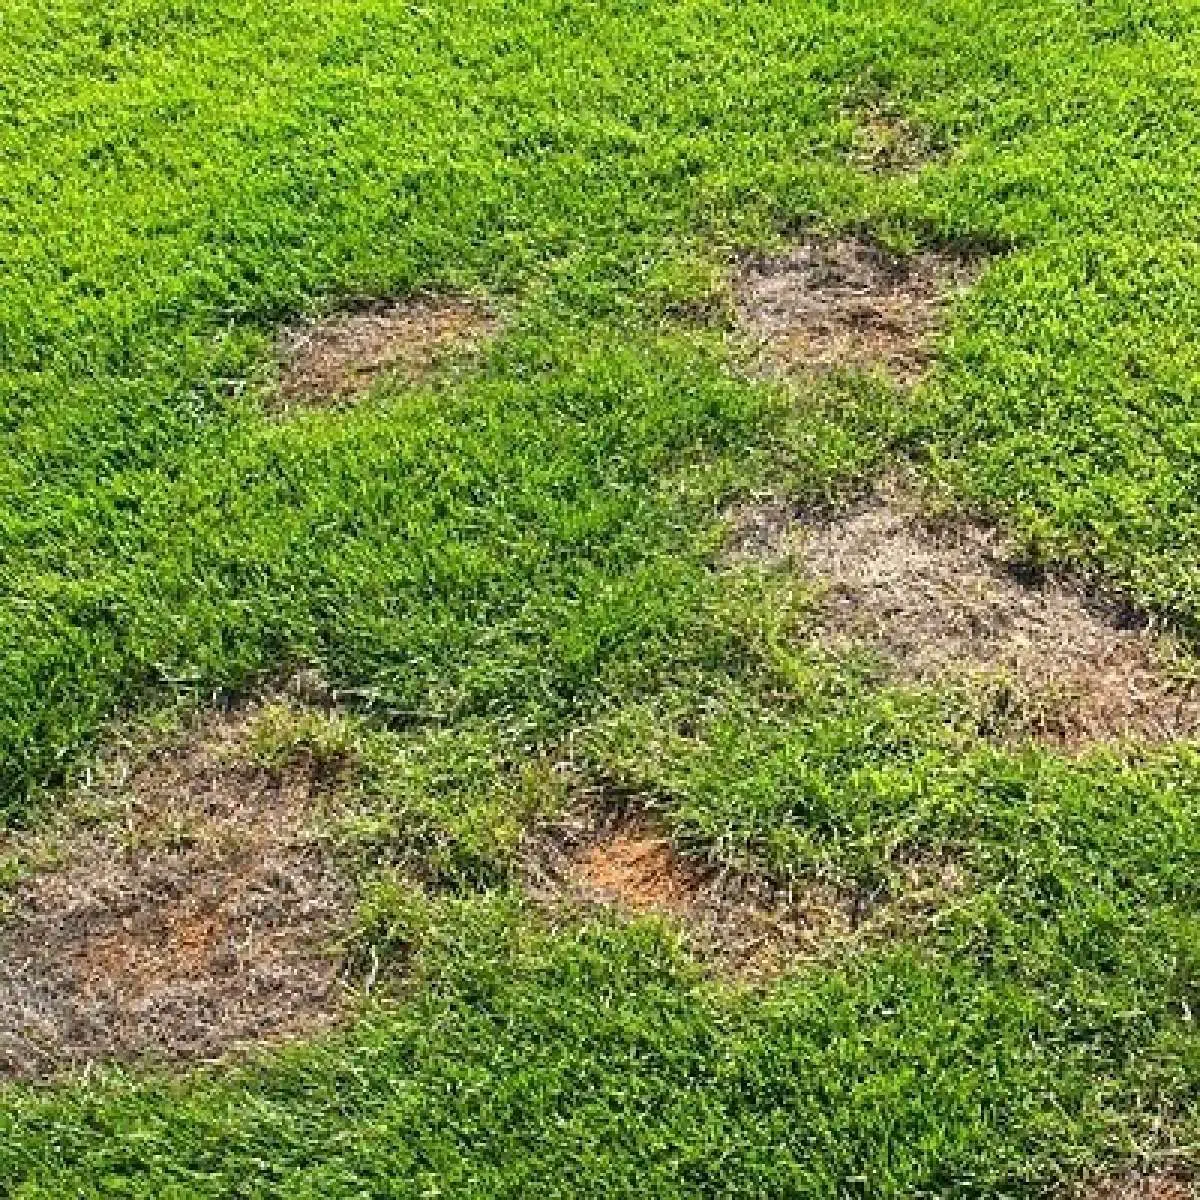 Bare Patches in Lawns